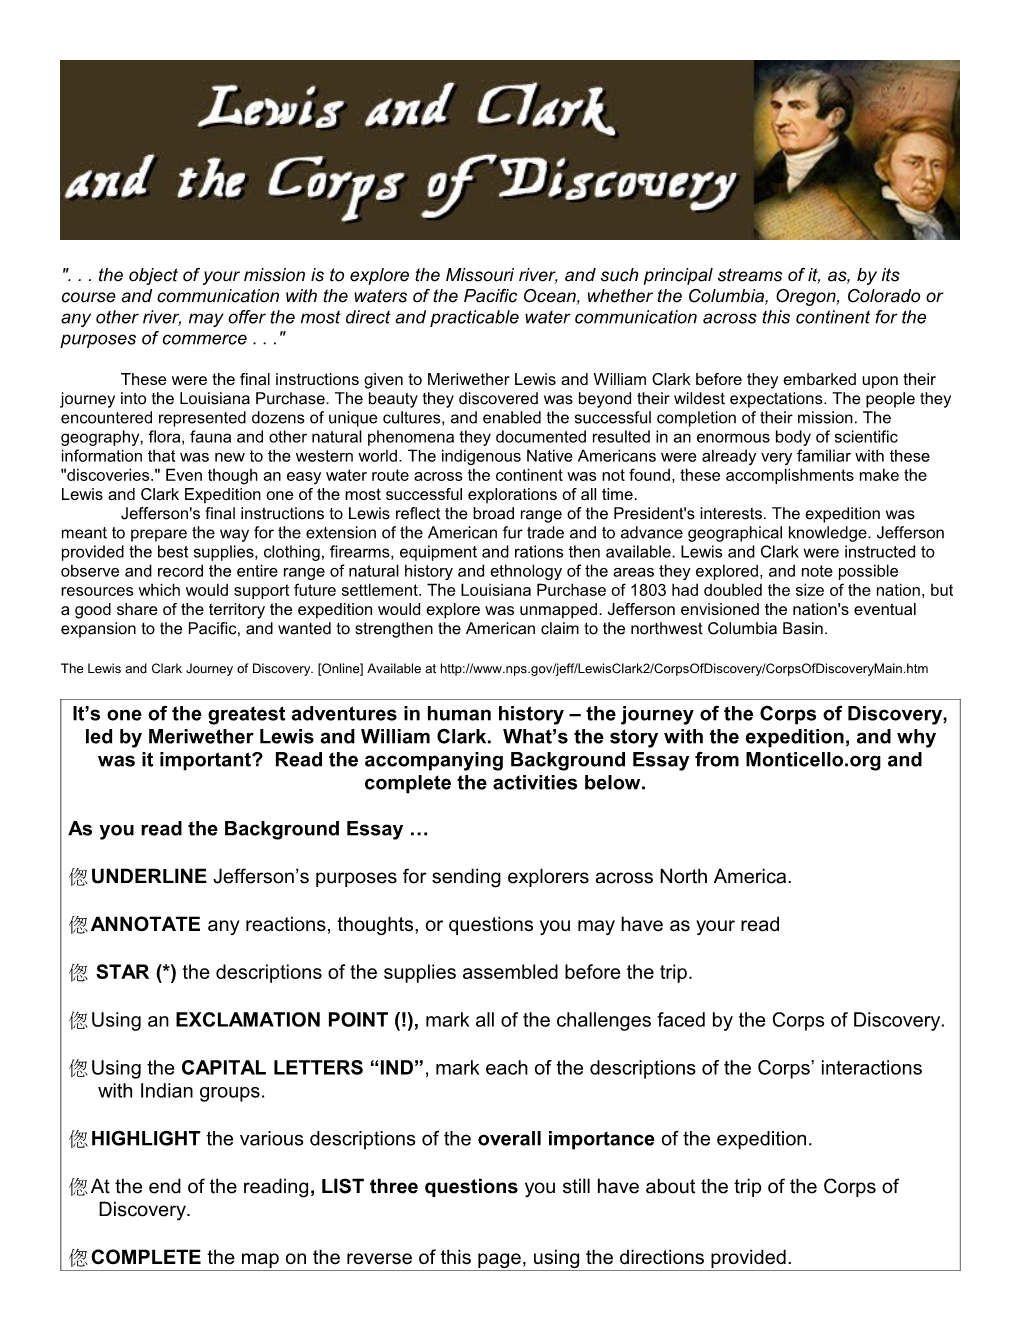 The Lewis and Clark Journey of Discovery. Online Available At